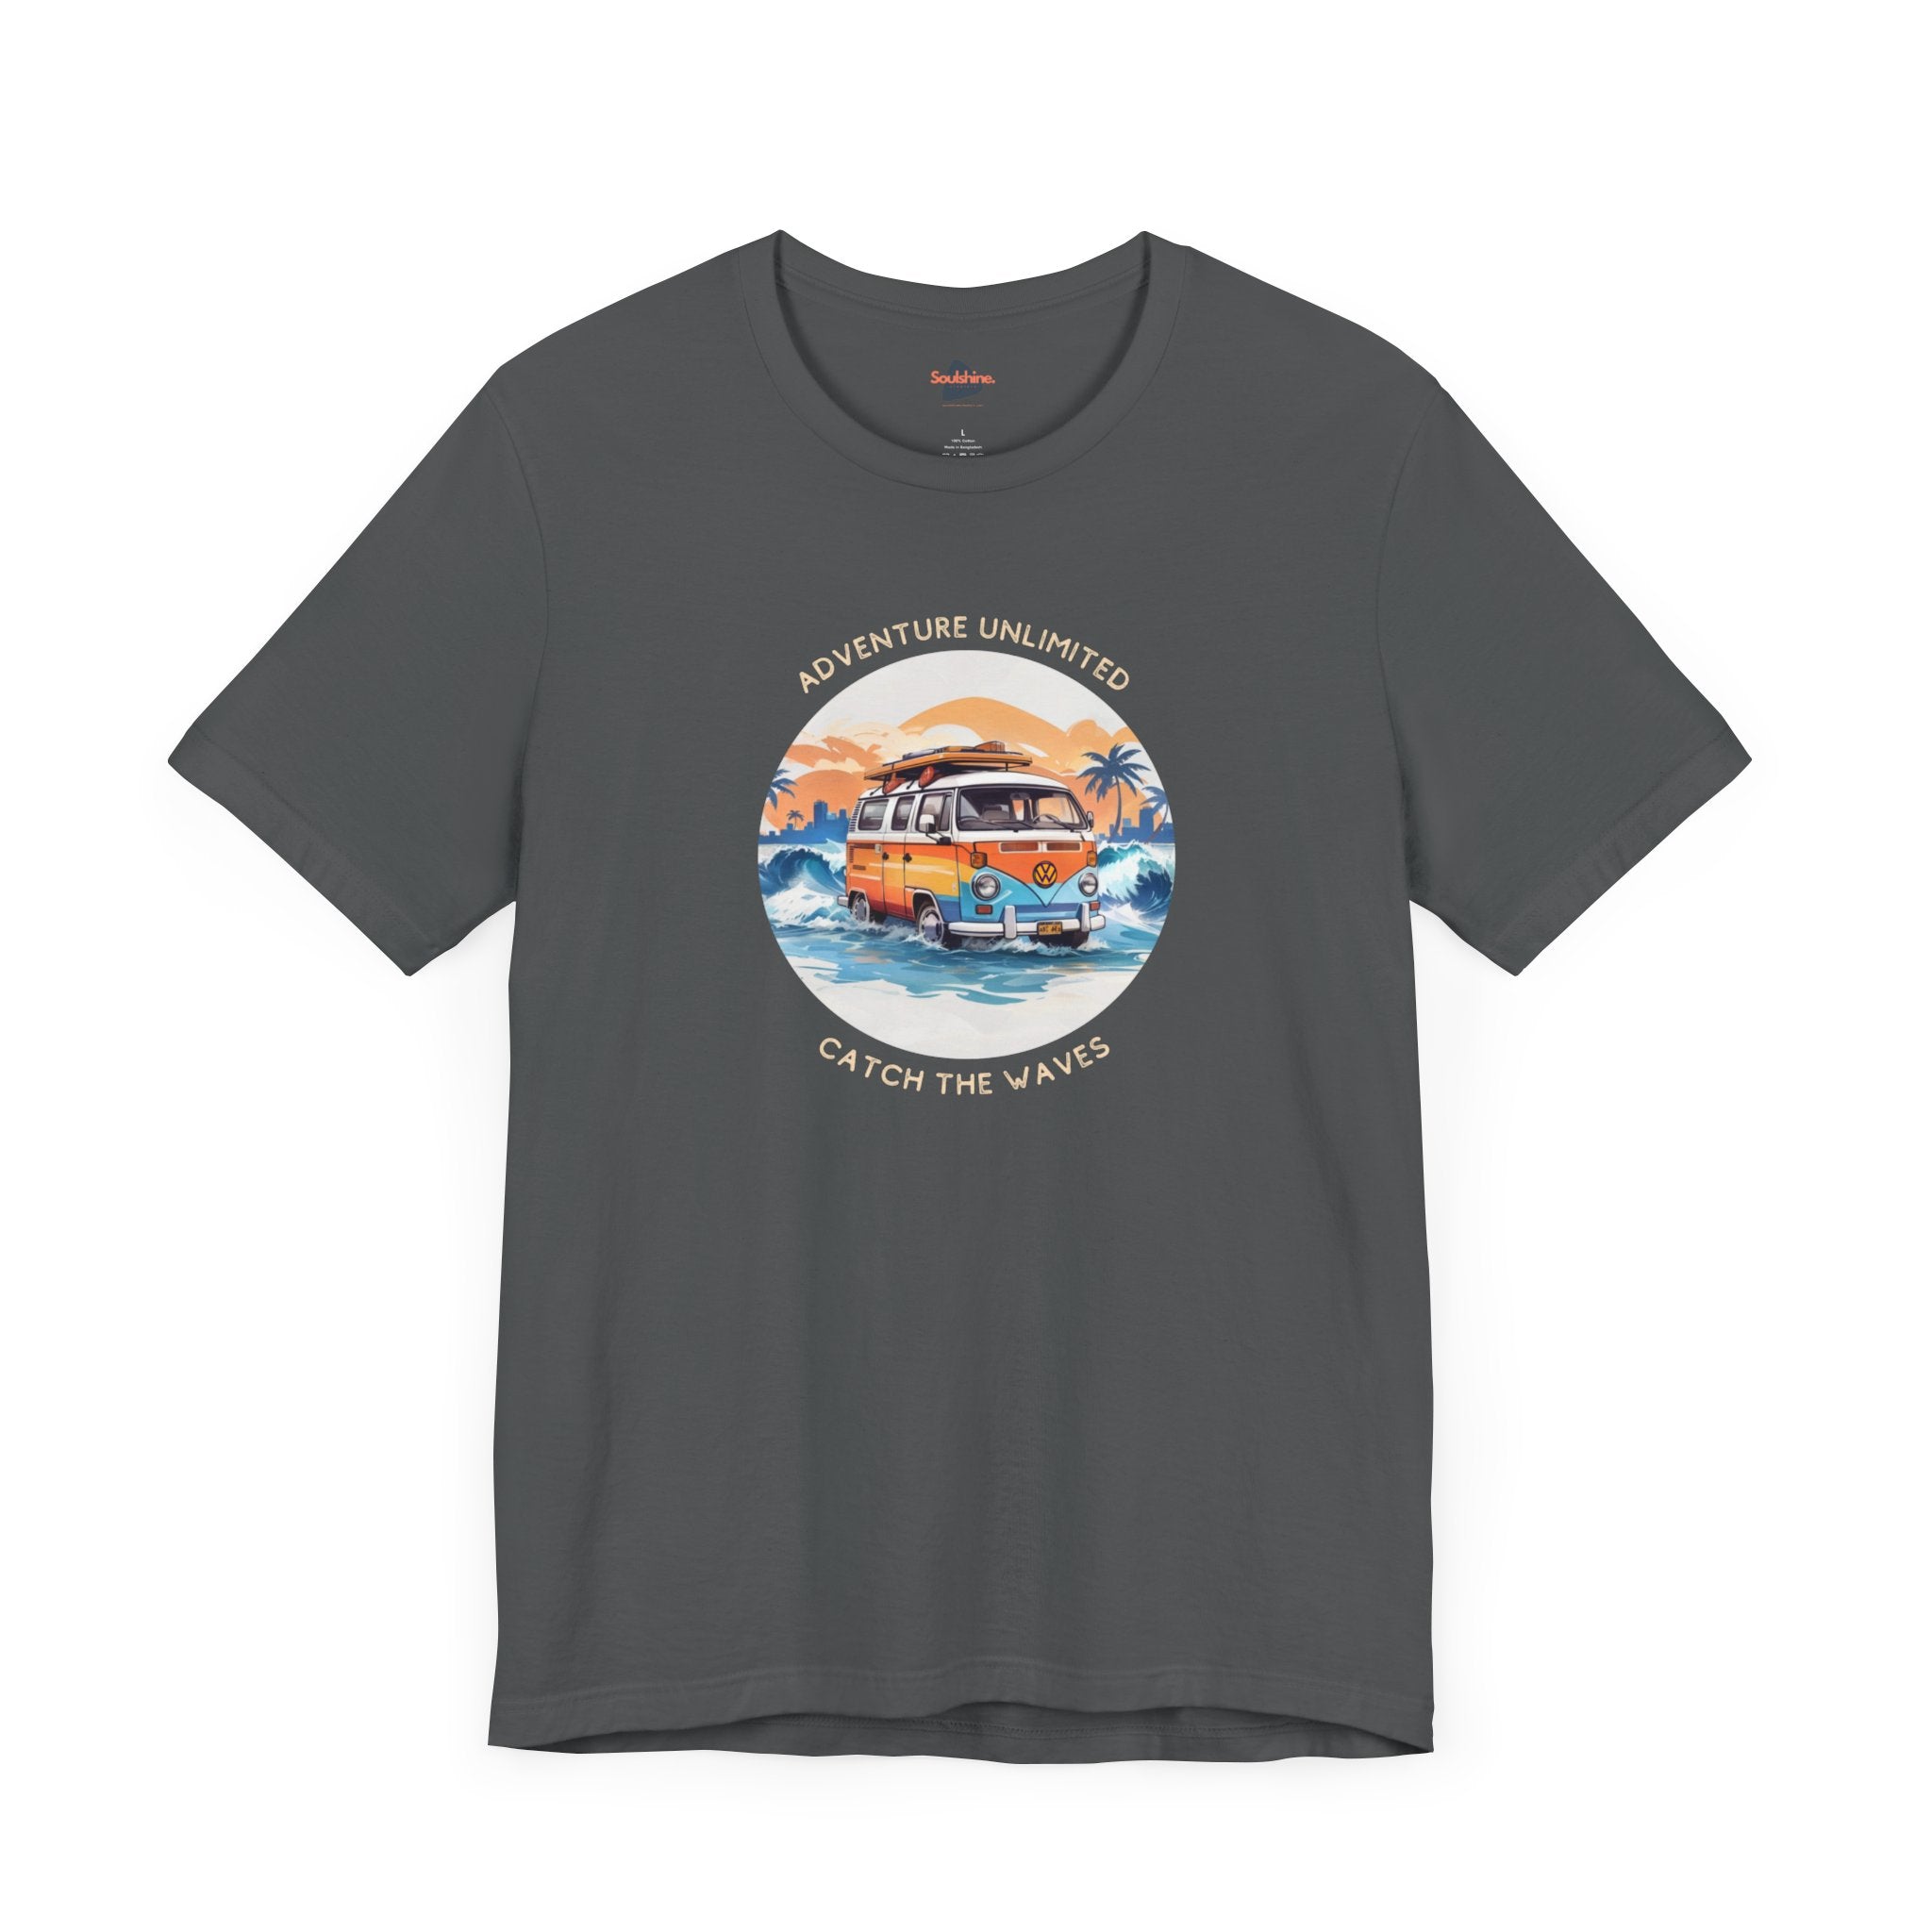 Adventure Unlimited grey unisex t-shirt with van on beach and sunset printed - direct-to-garment item